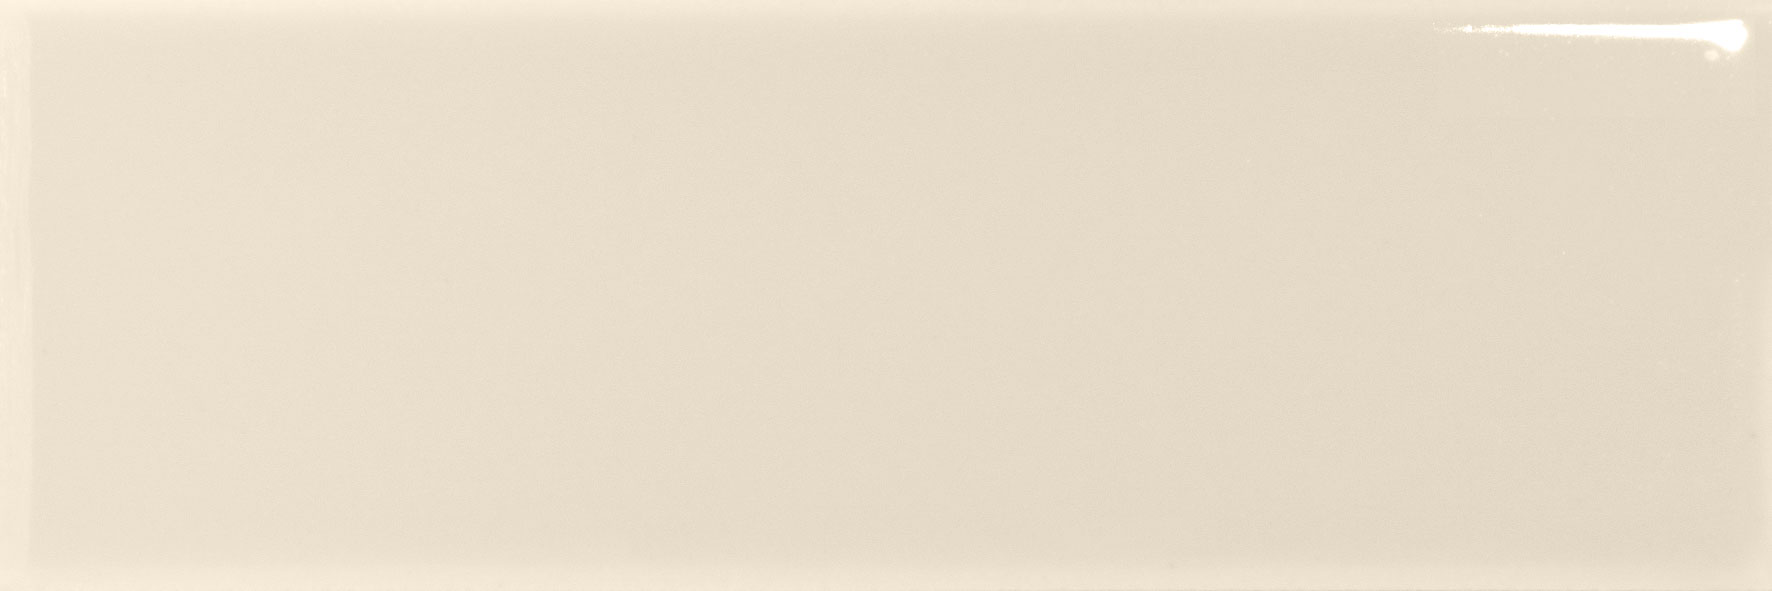 Colorform_Beige_Glossy